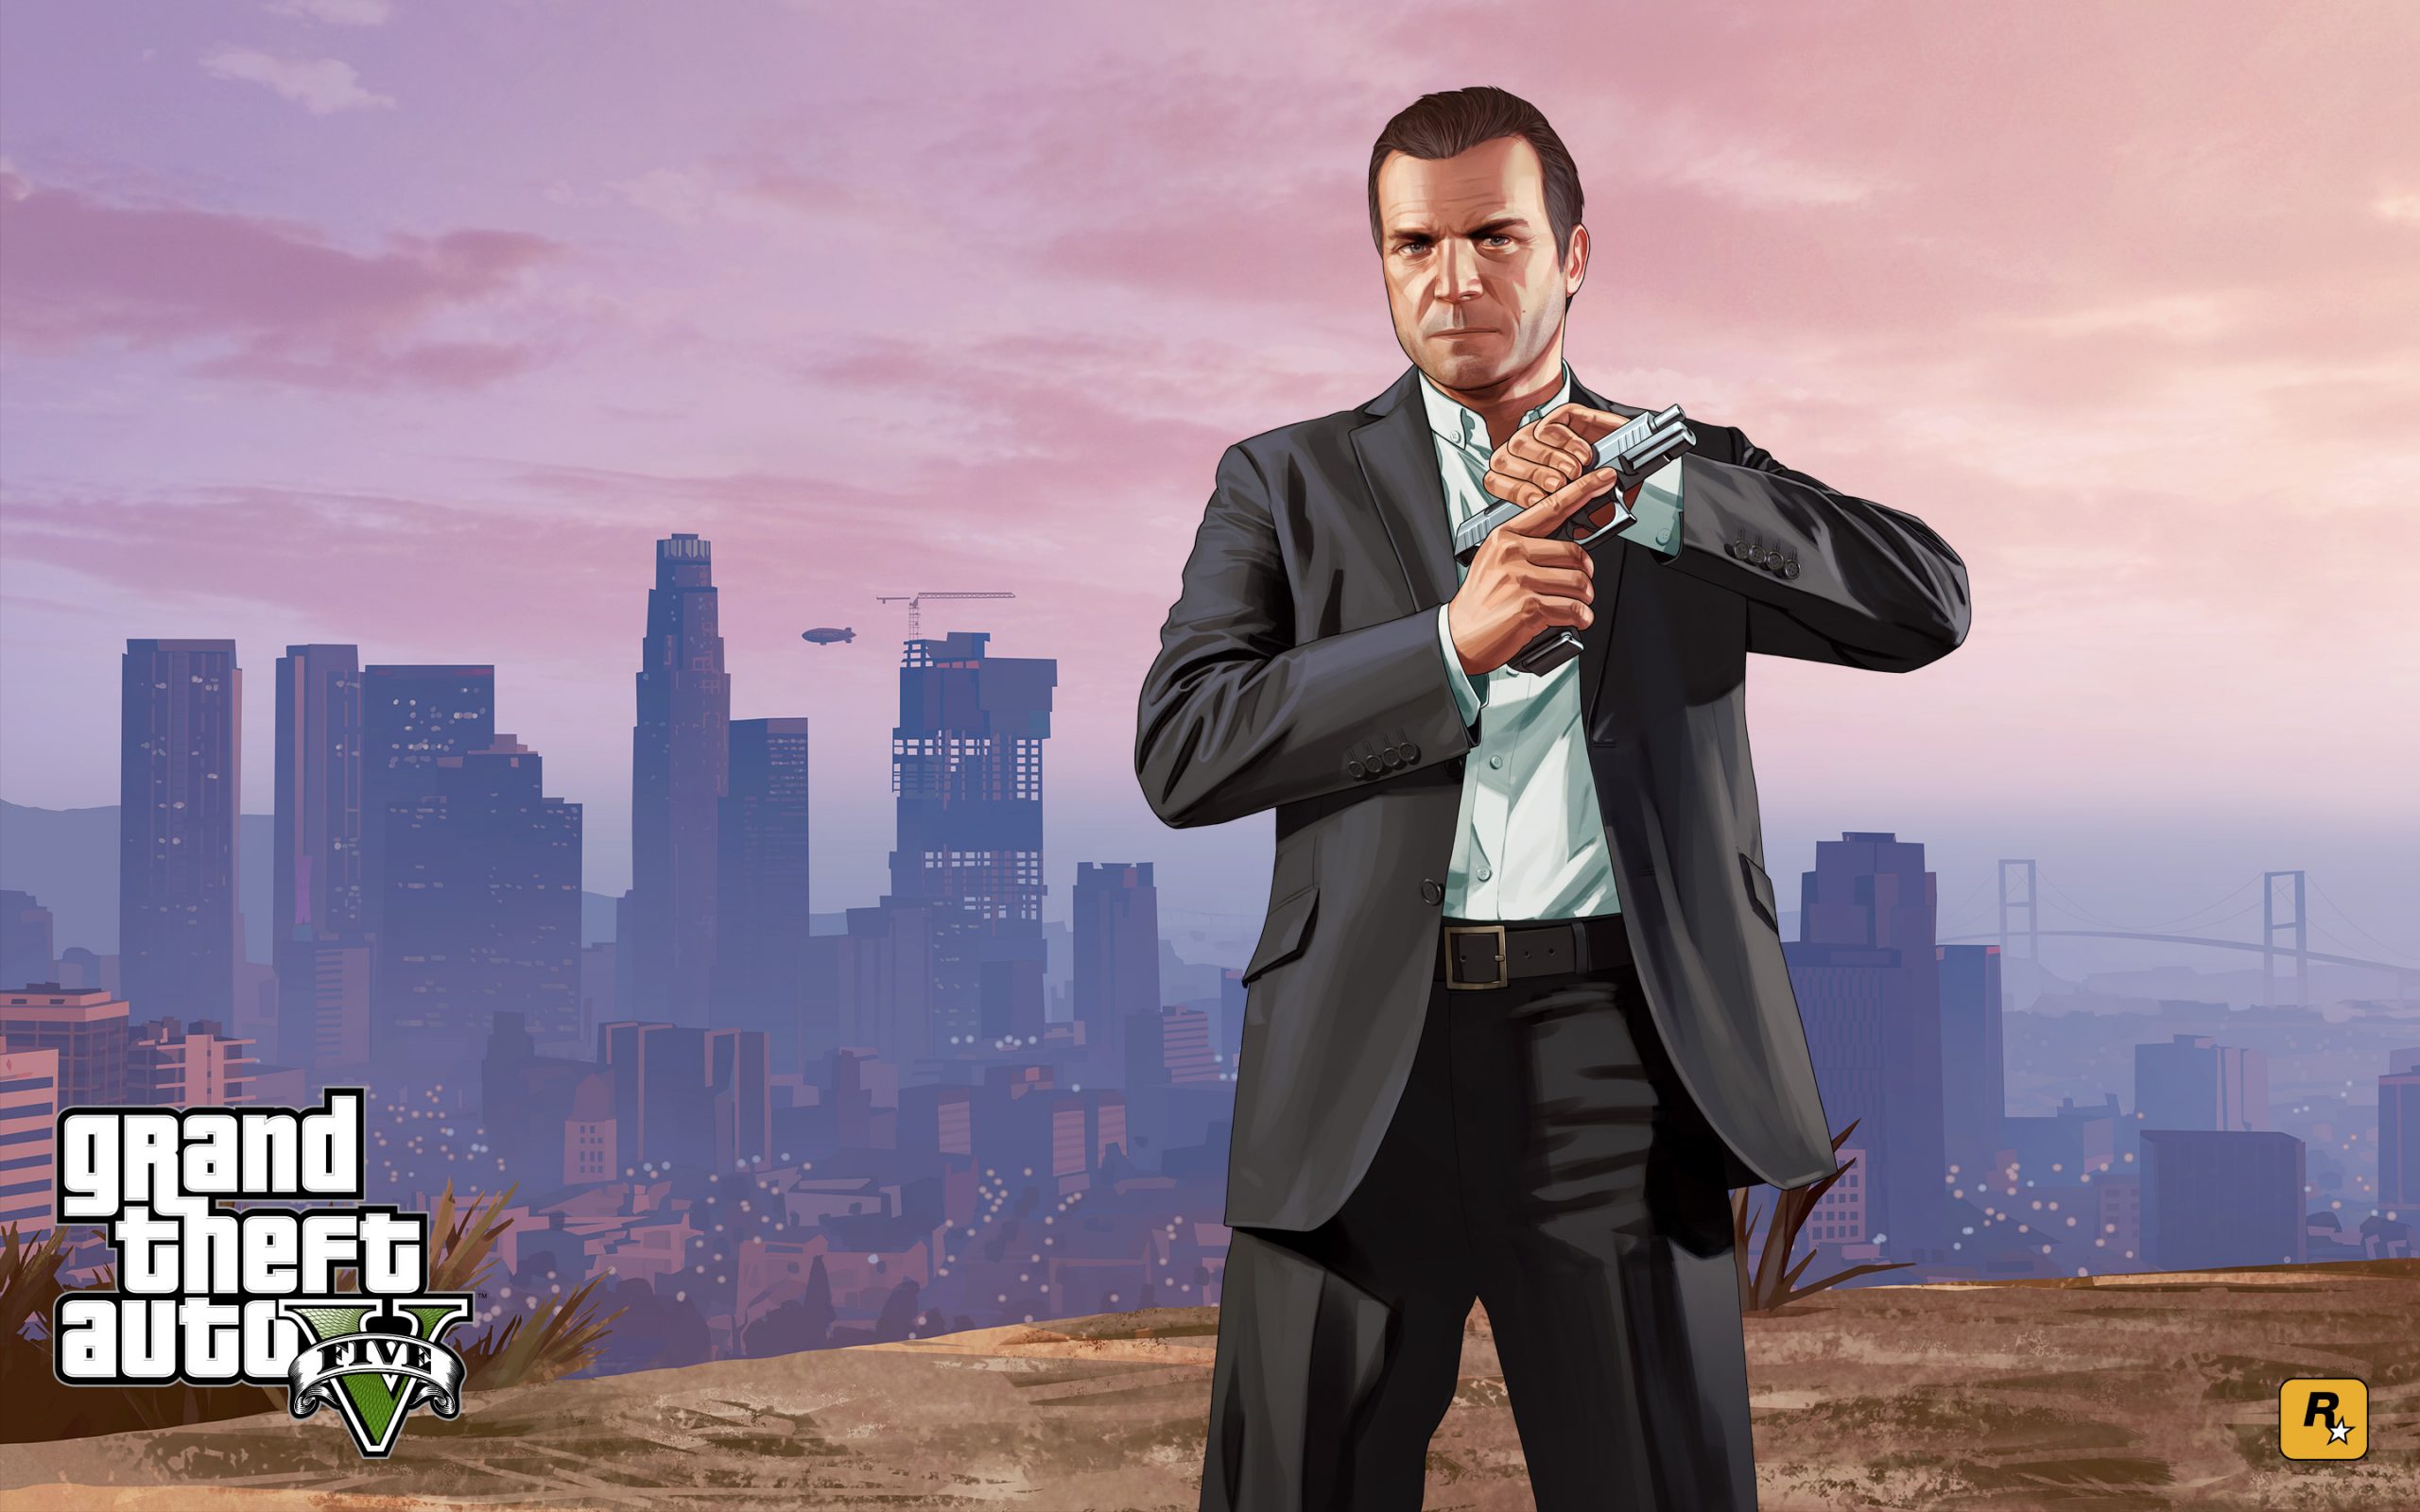 How to switch characters in GTA 5 on PC, PS3, PS4 or XBOX?